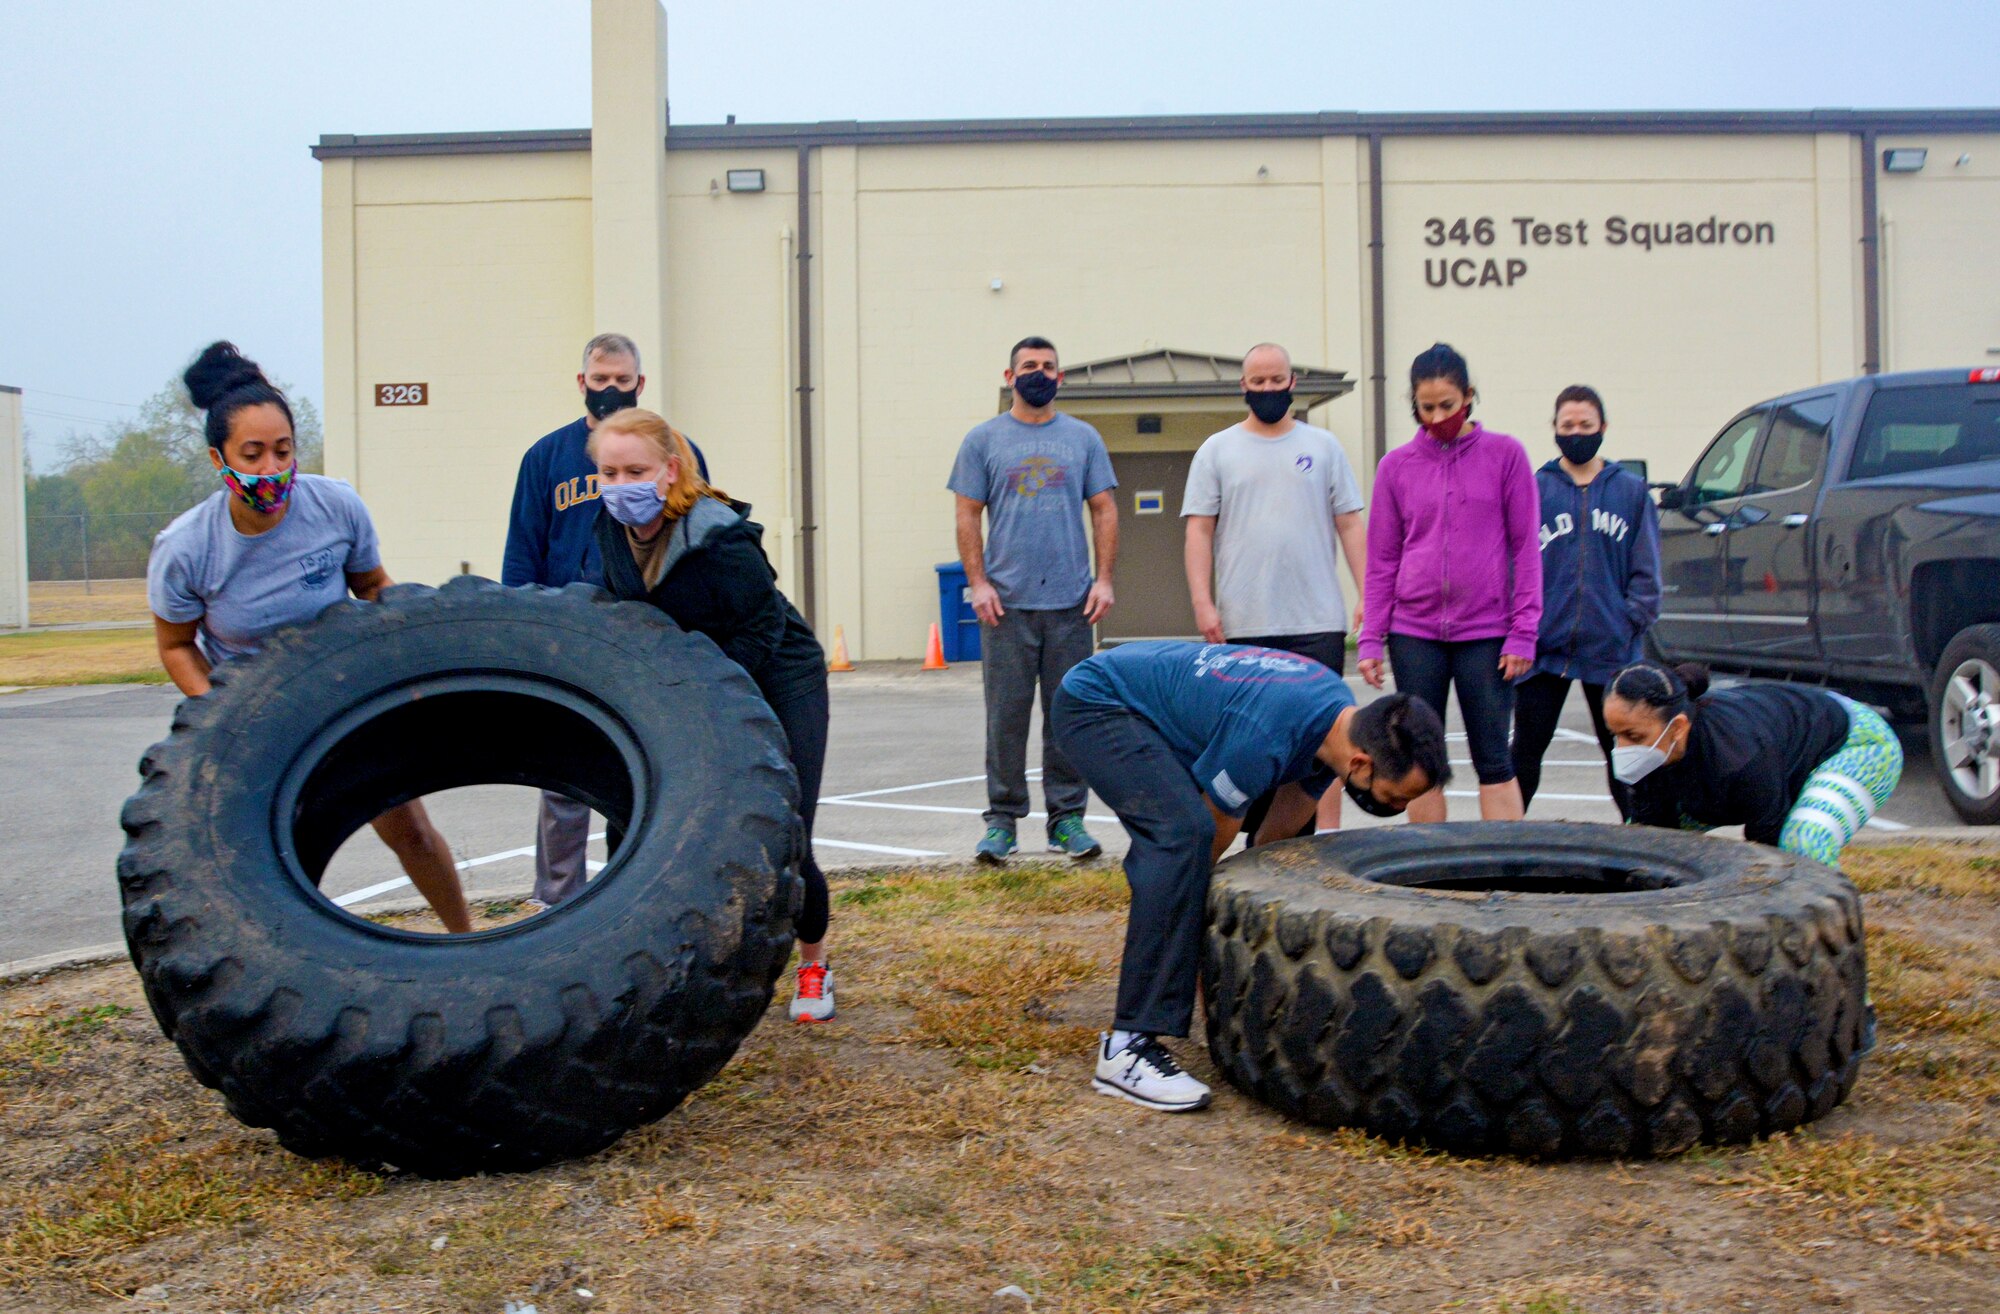 First sergeants of the 960th Cyberspace Wing lift tires Nov. 19, 2020, in a team building exercise during the wing leadership summit at Joint Base San Antonio-Chapman Training Annex, Texas. (U.S. Air Force photo by Samantha Mathison)